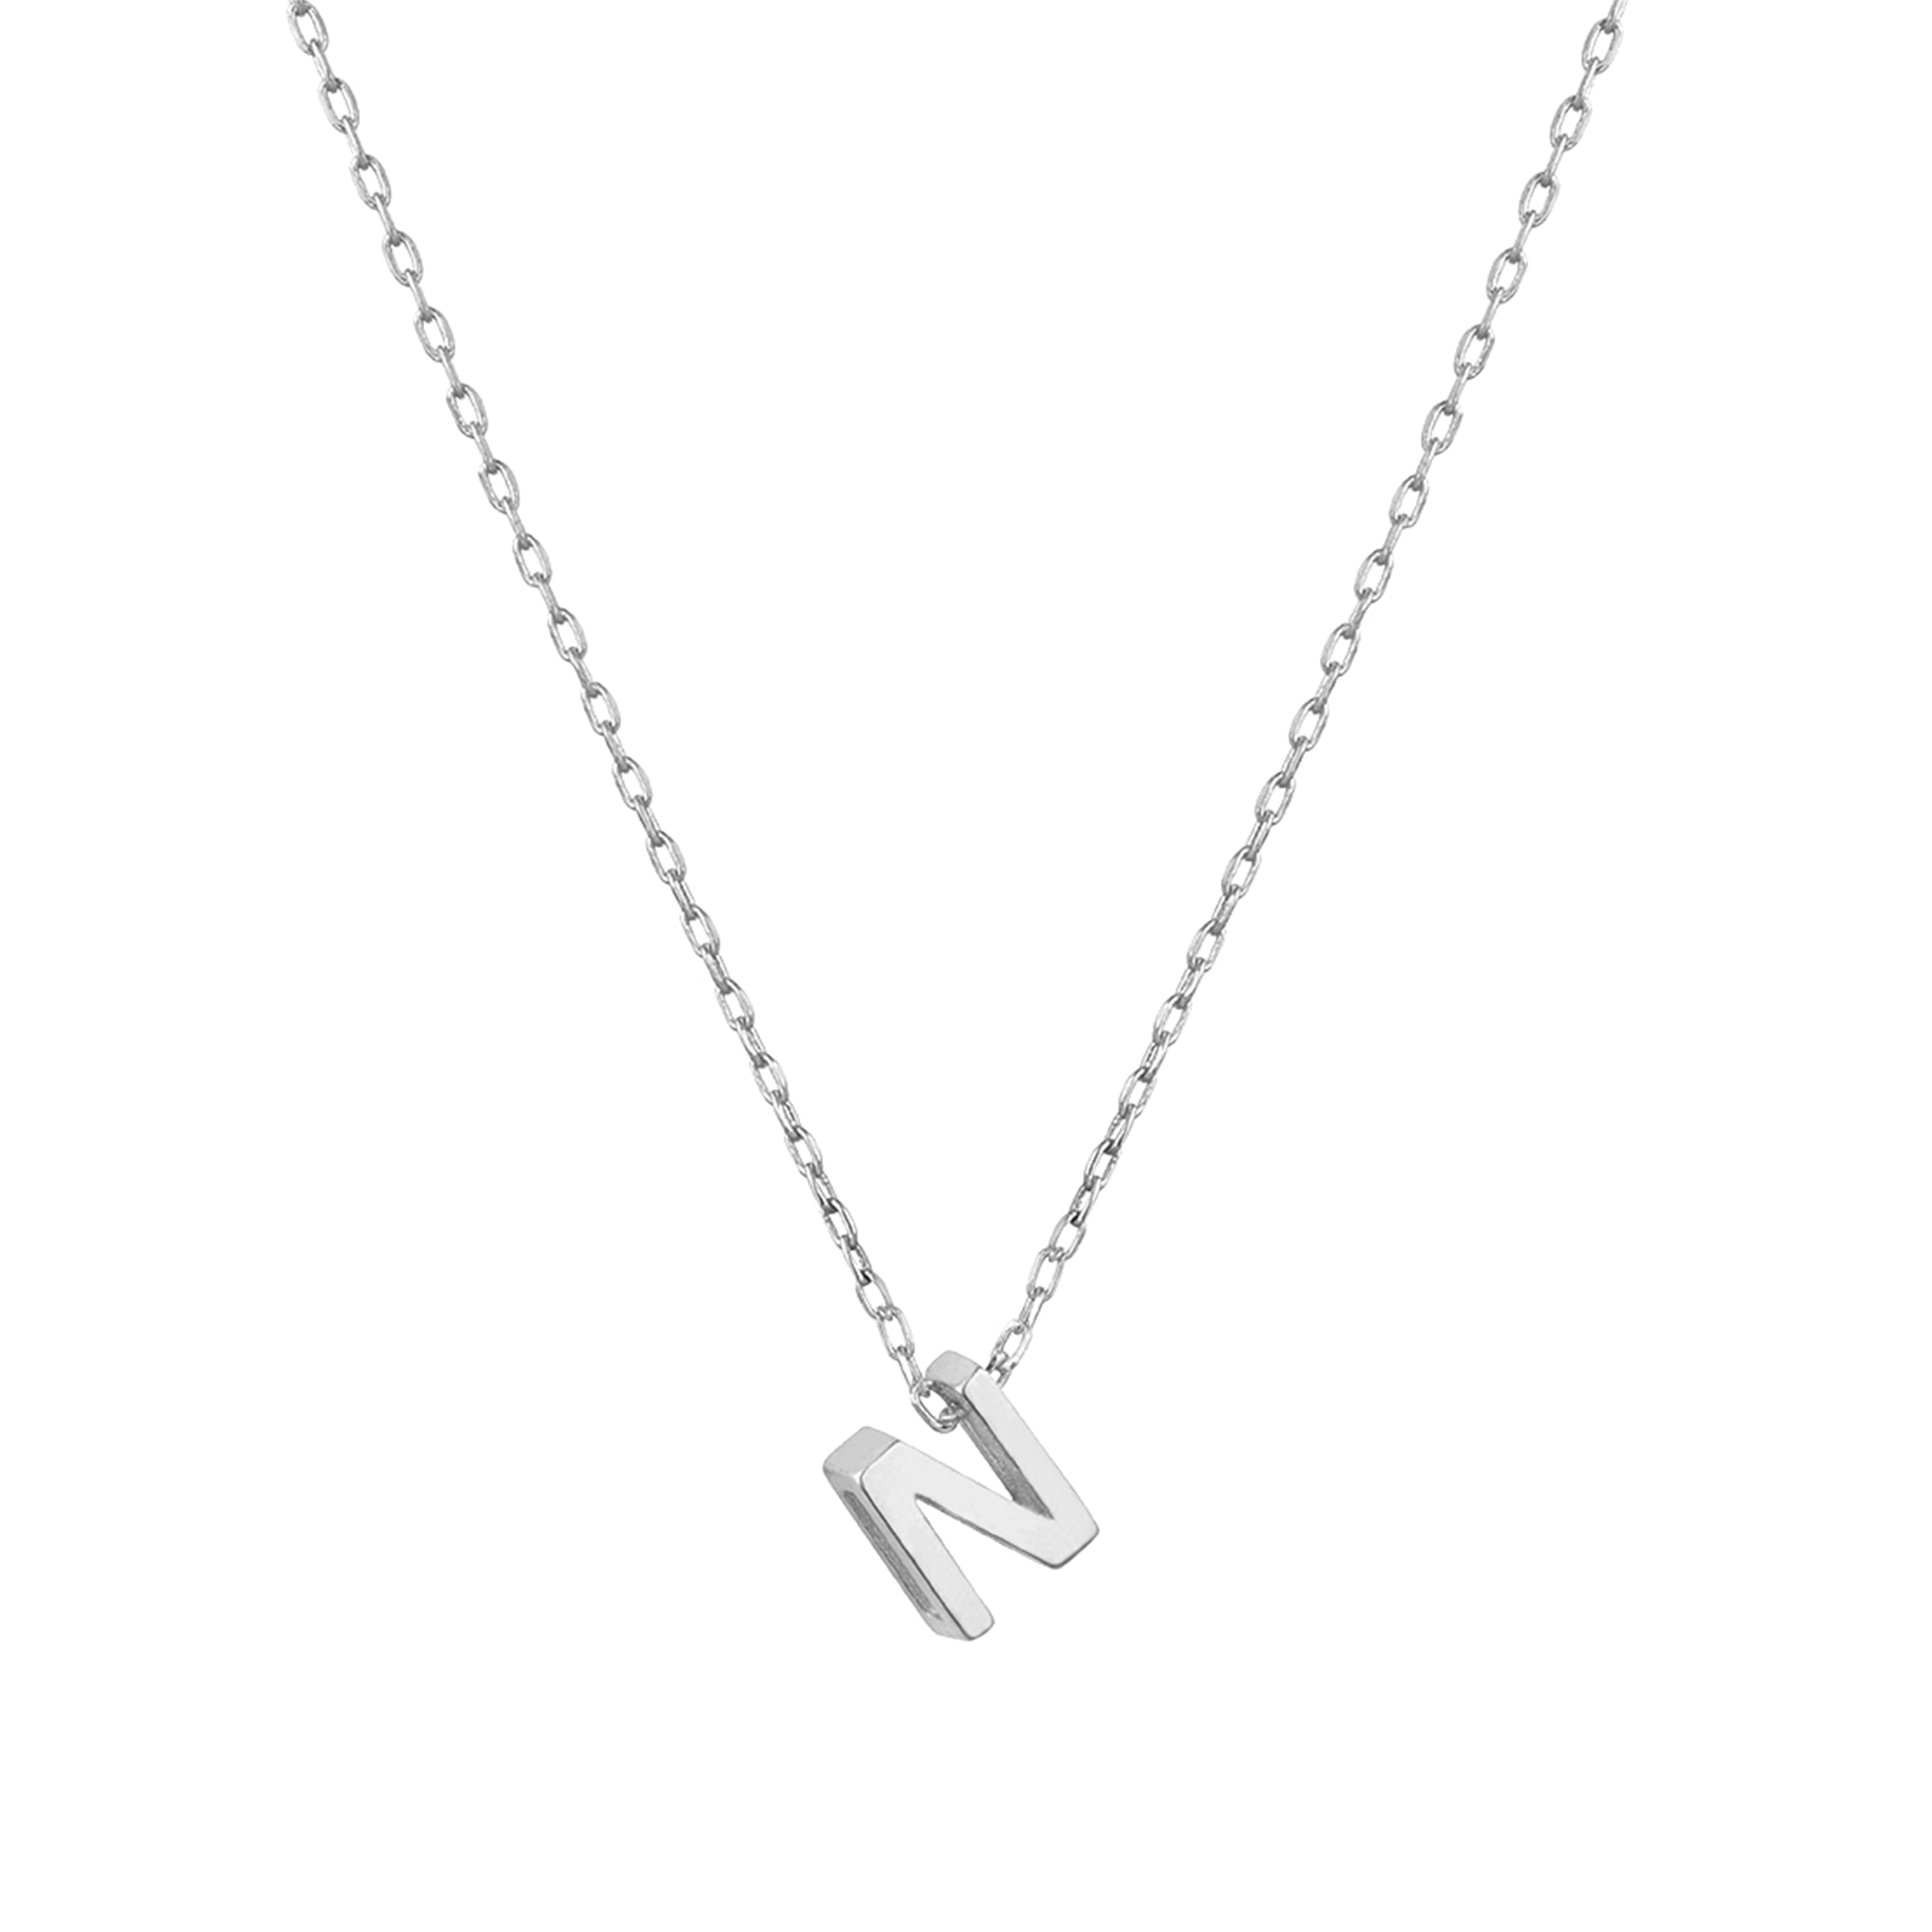 14K SOLID WHITE GOLD DIAMOND INITIAL NECKLACE, LETTER N NECKLACE | eBay